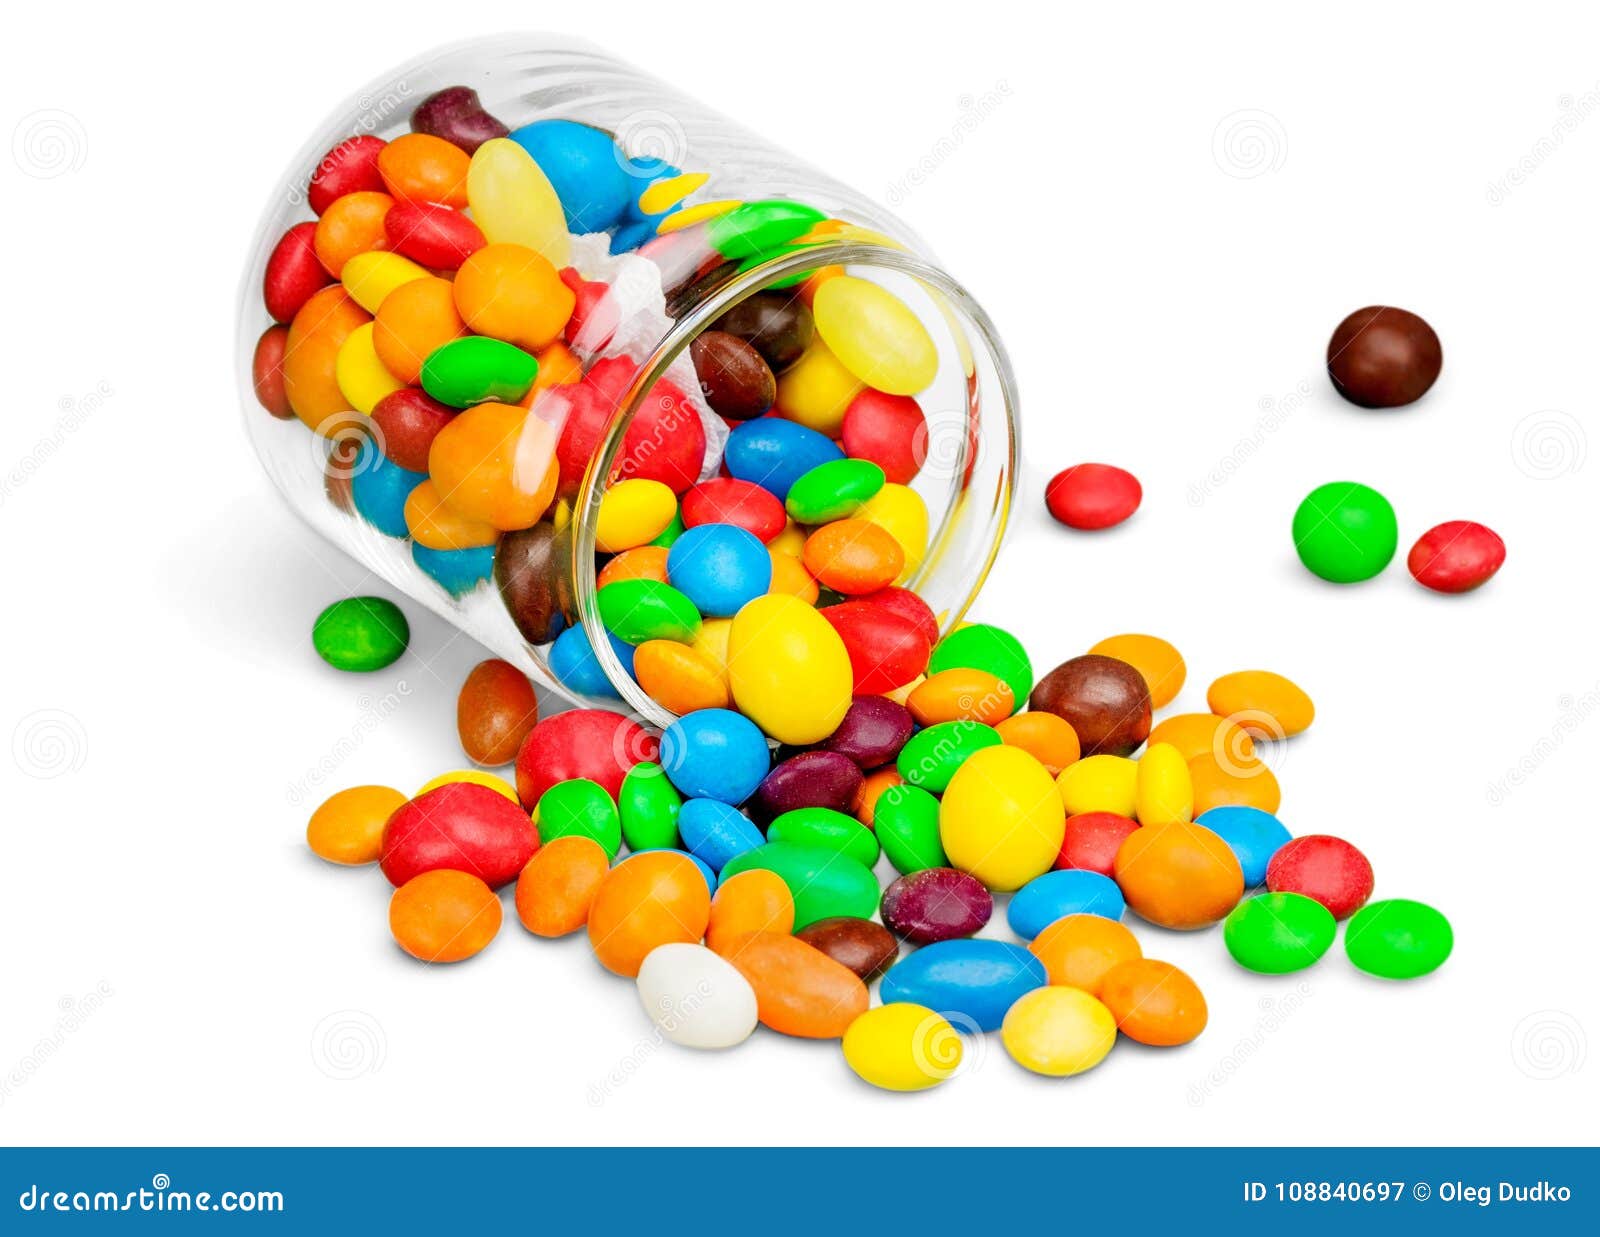 Glass Jar with Colorful Candies on White Stock Image - Image of drink ...